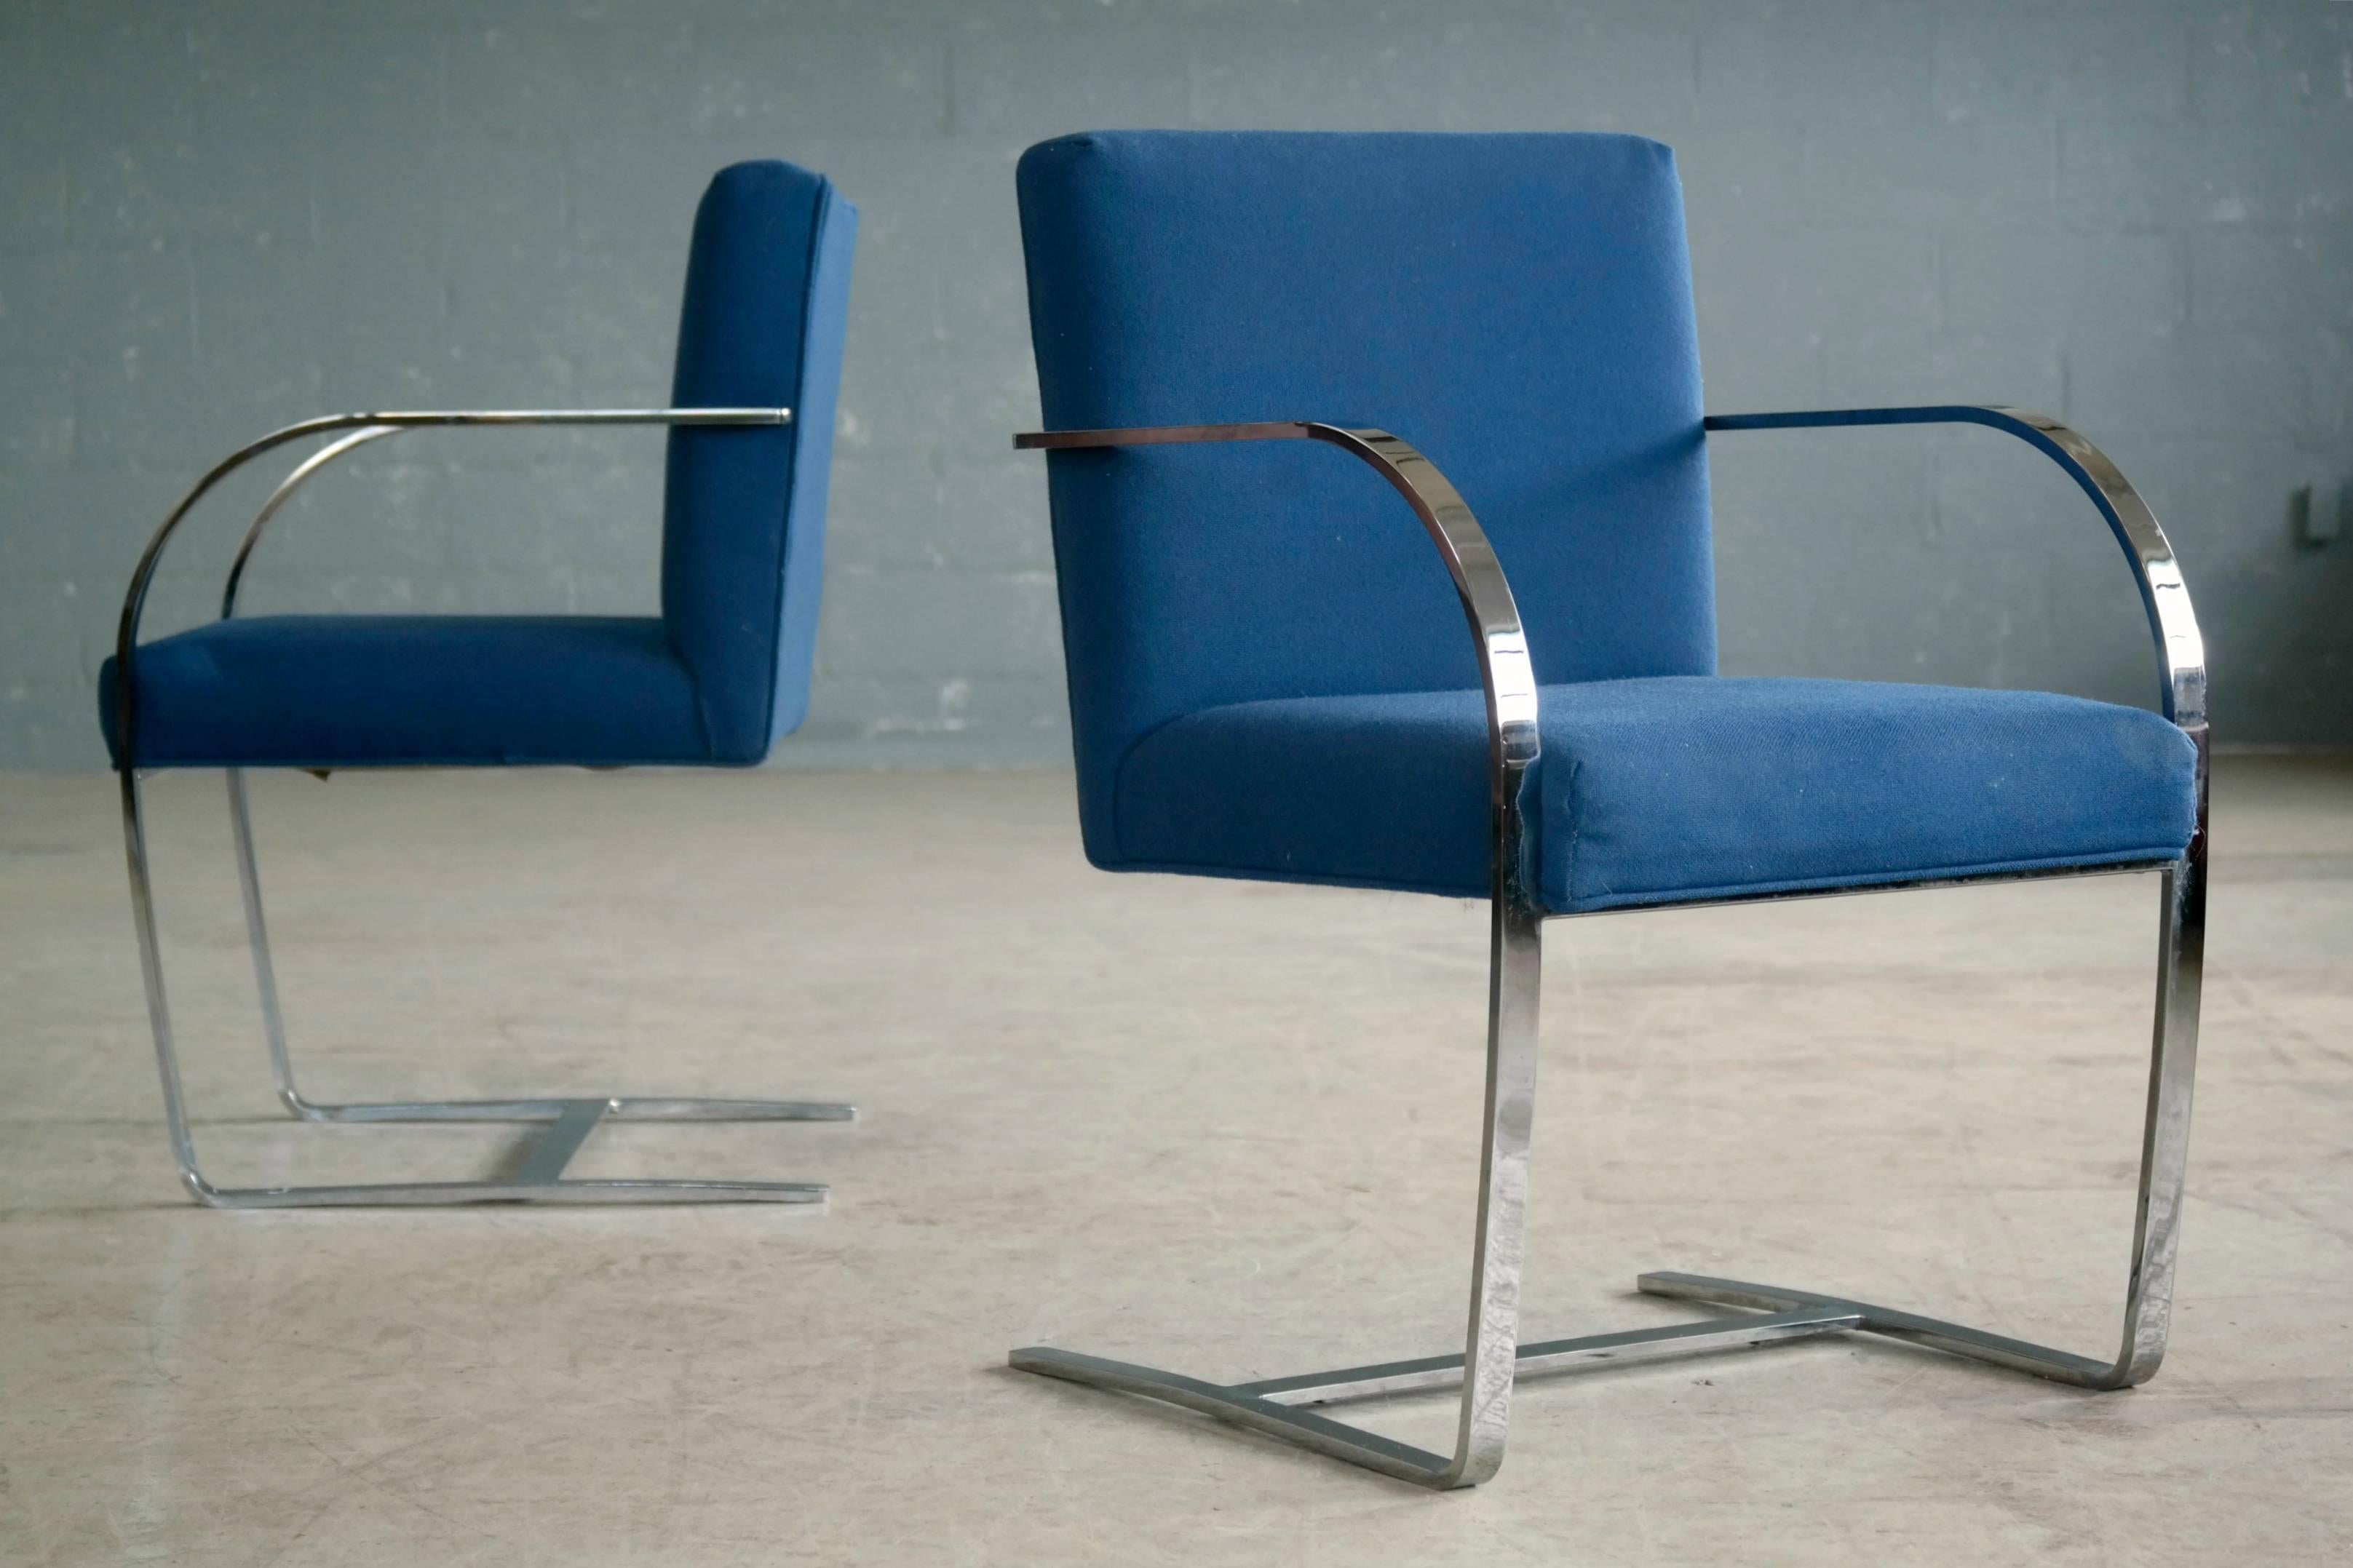 Pair of arm or side chairs in the Classic style of the Brno chairs my Knoll. These beautiful chairs in chrome and blue wool fabric have a label from the Designer's Furniture Center Intl. in Manhattan but no Knoll label. Very good condition with no